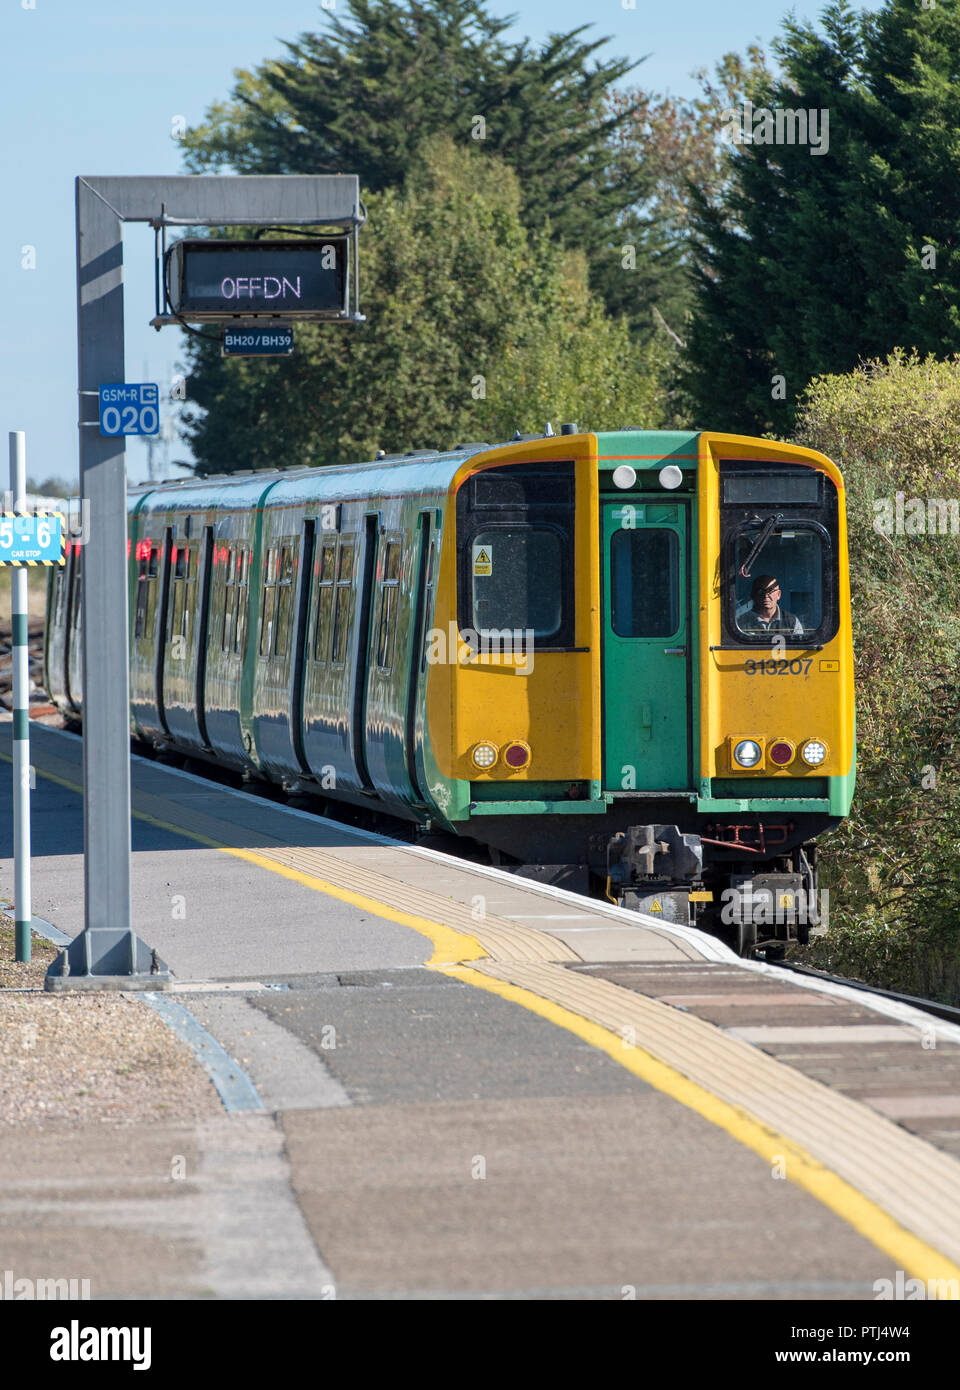 class 313 electric multiple unit train in the platform at barnham station in west sussex heading for Bognor regis as a destination. Stock Photo